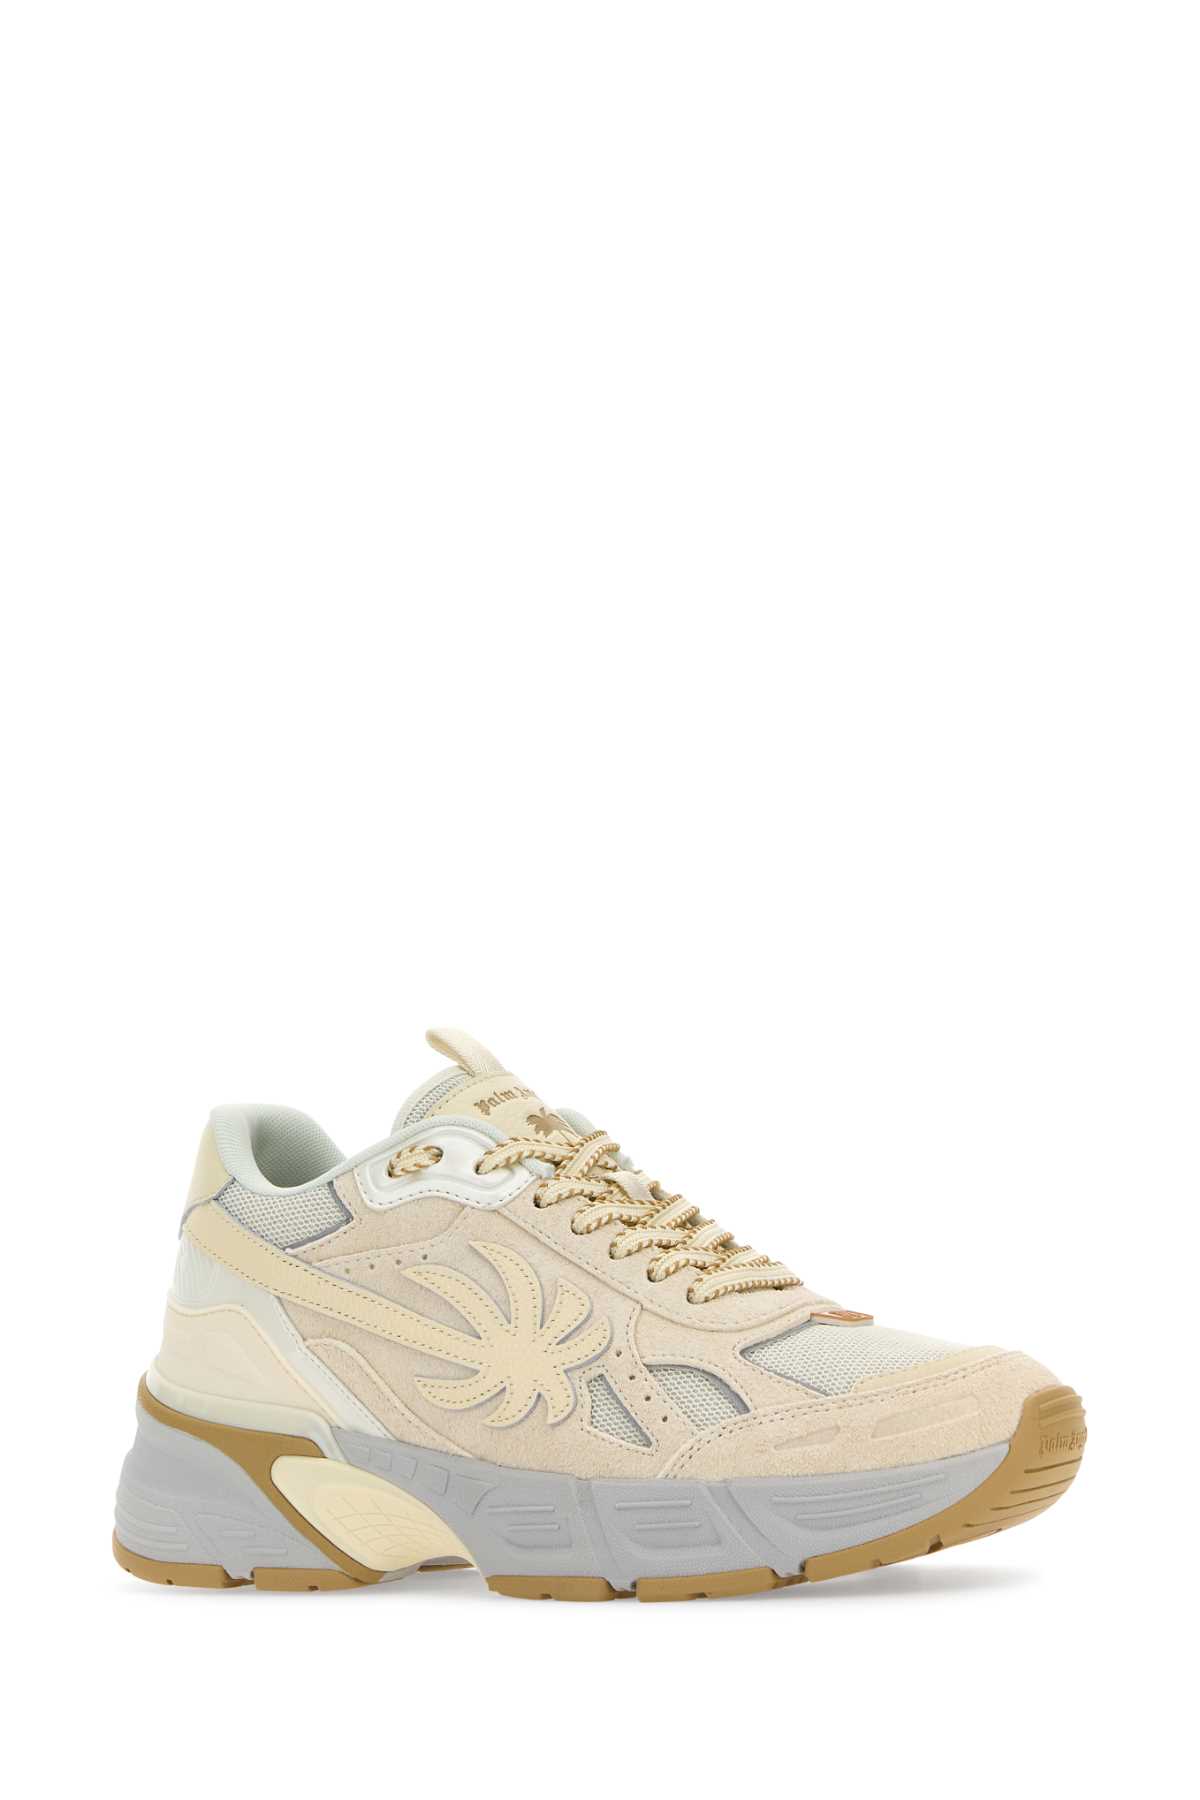 Palm Angels Multicolor Leather And Fabric Pa 4 Sneakers In Beigebei